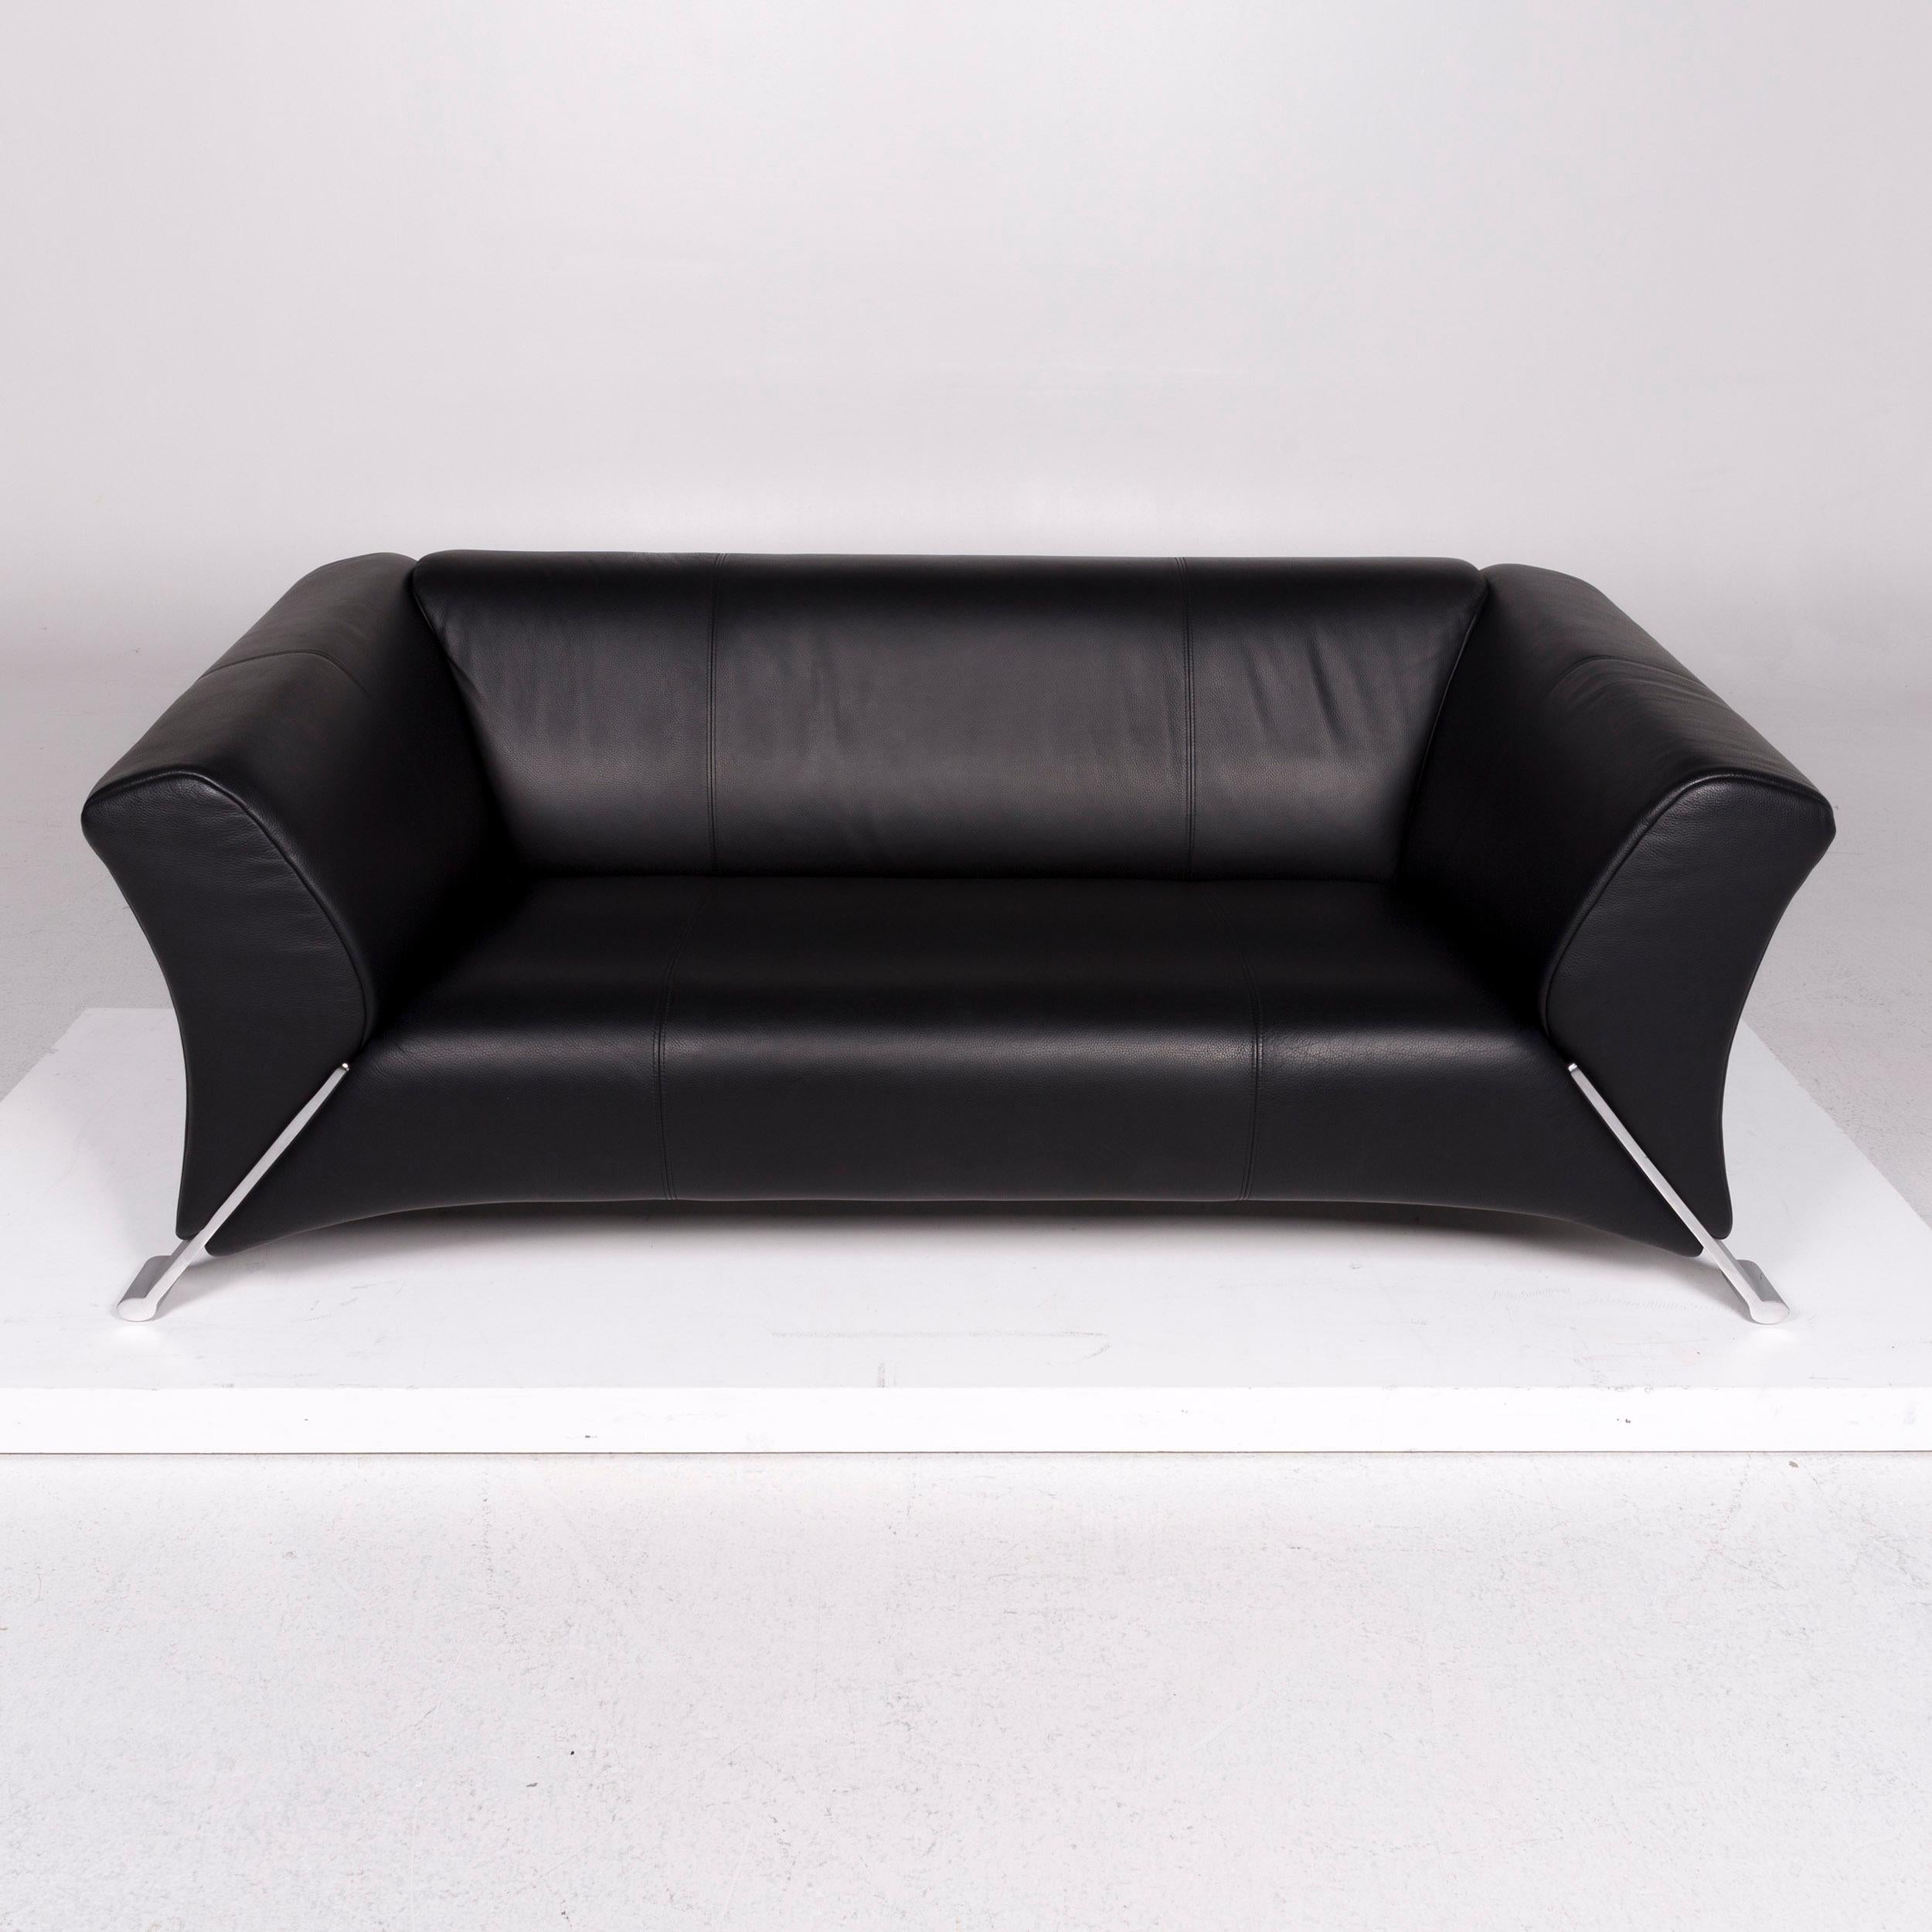 Rolf Benz 322 Leather Sofa Black Two-Seat In Excellent Condition For Sale In Cologne, DE